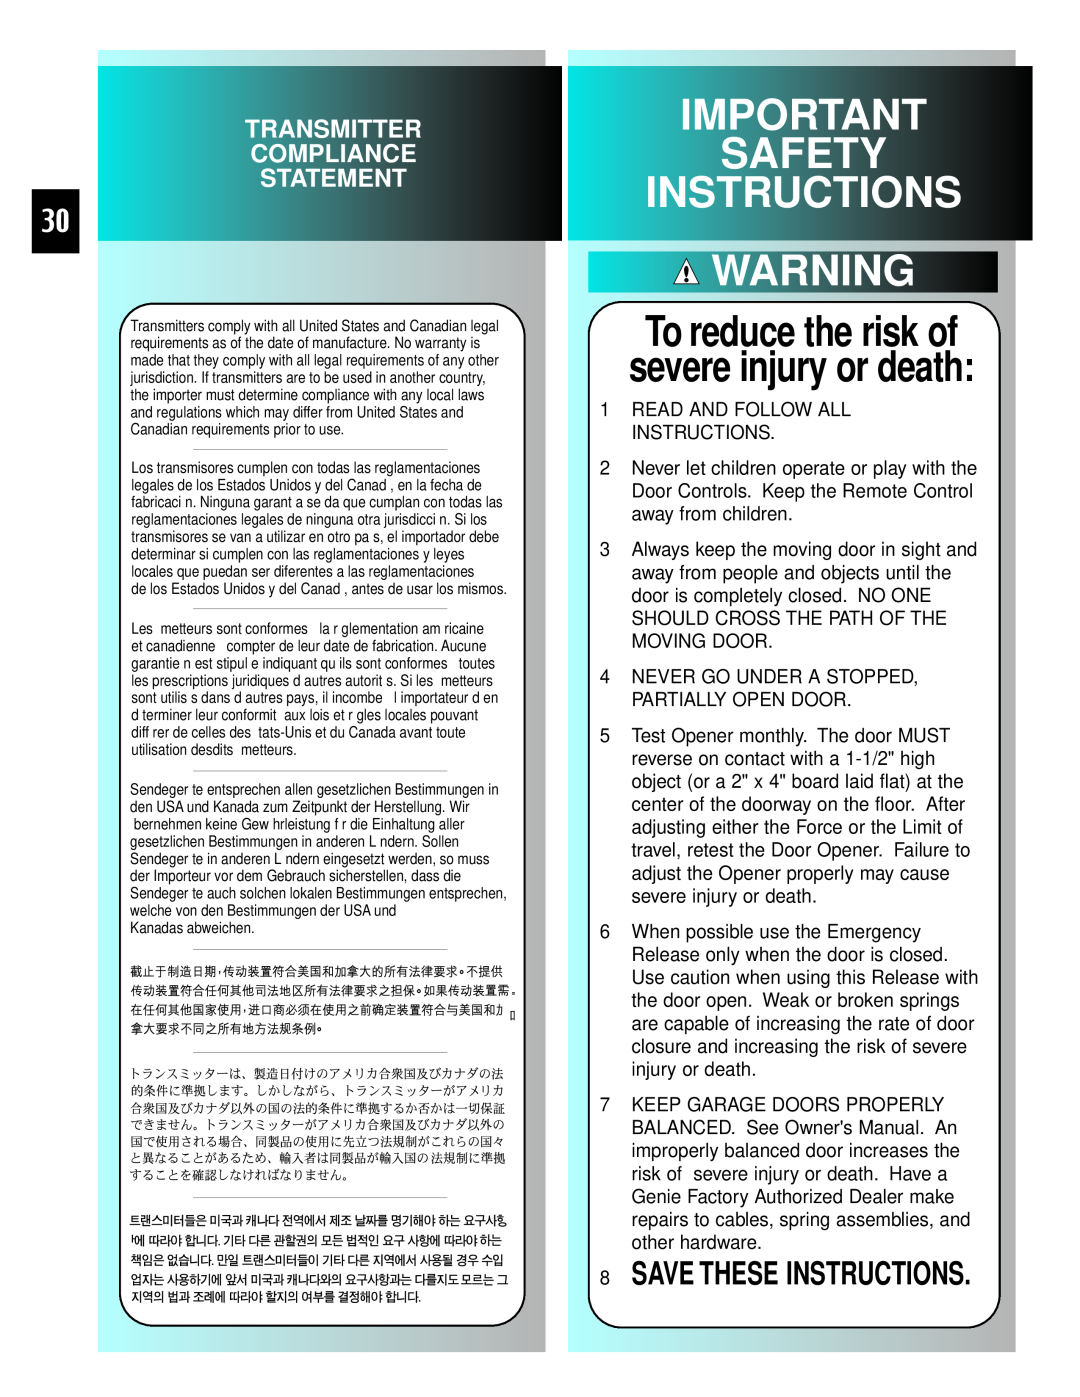 Genie 3511035556 manual Safety Instructions, To reduce the risk of severe injury or death, Save These Instructions 